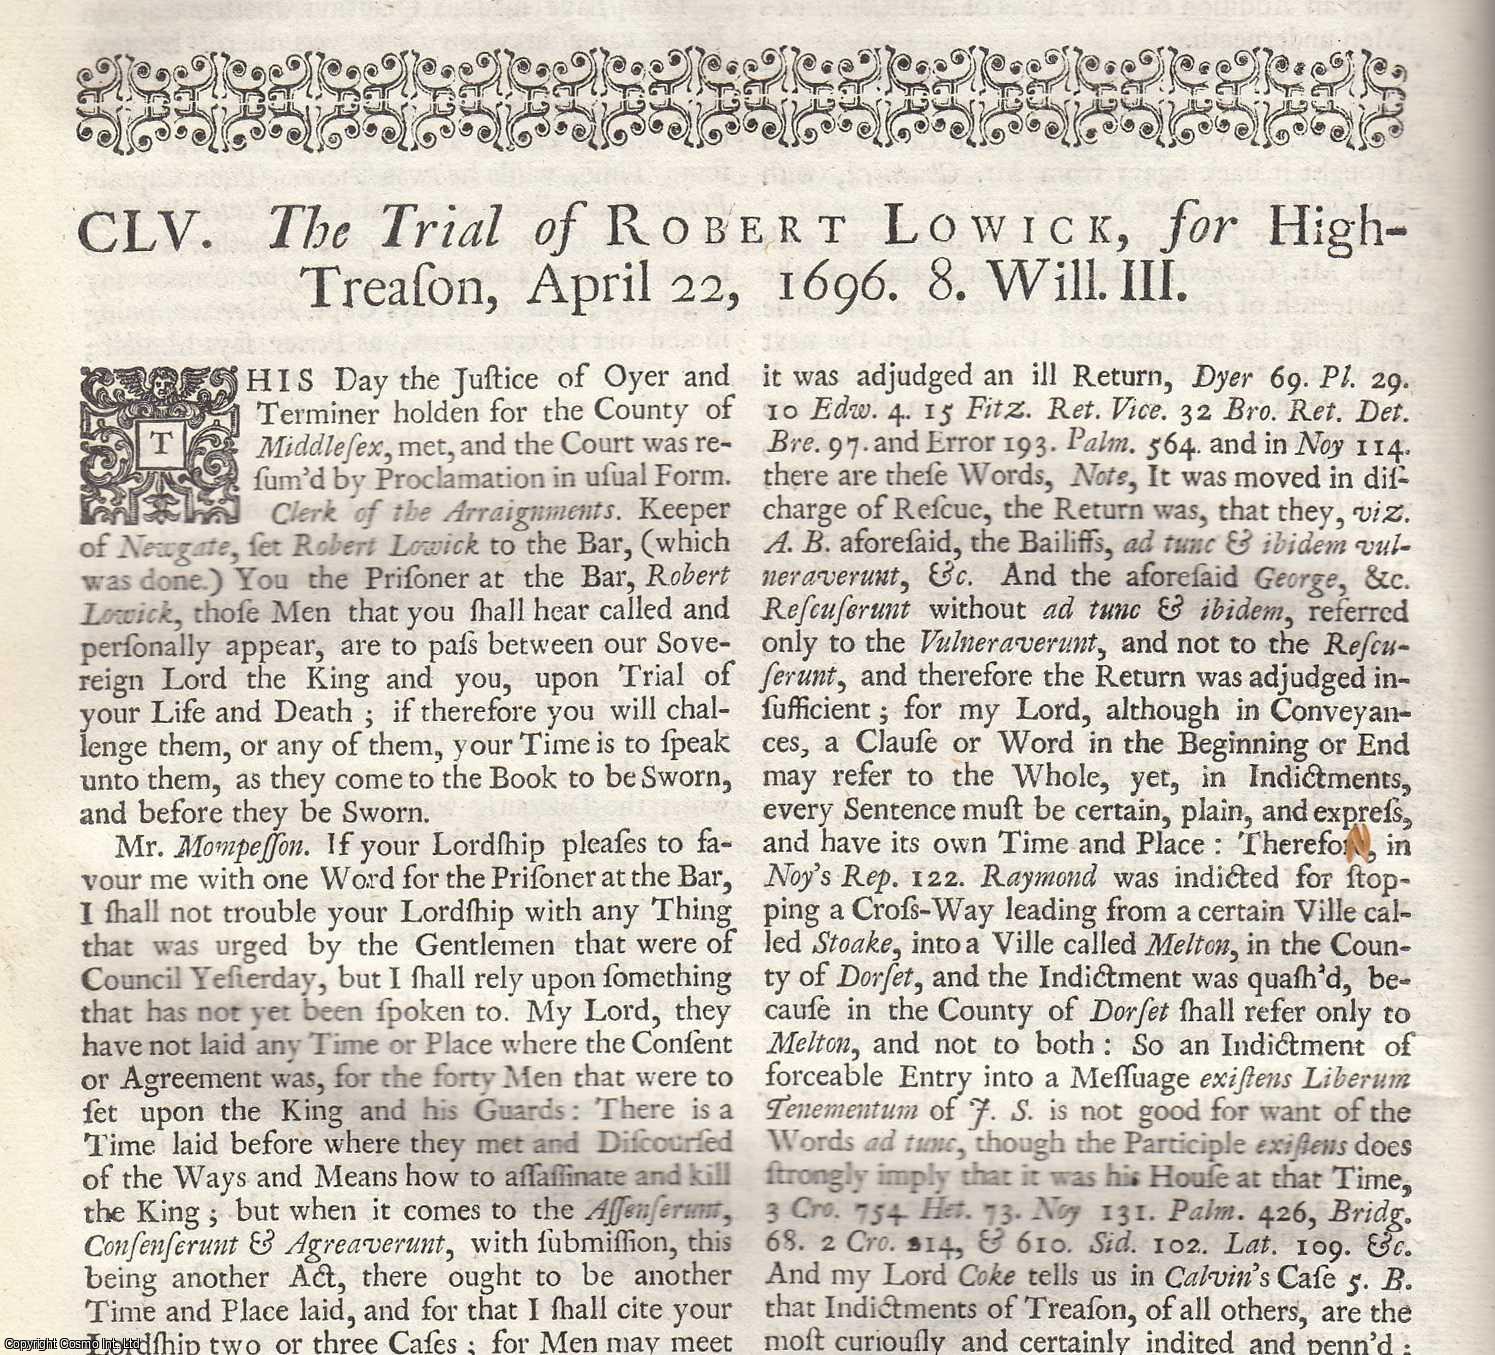 [Trial] - The Trial of Robert Lowick, for High Treason, April 22, 1696. An original article from the Collected State Trials.